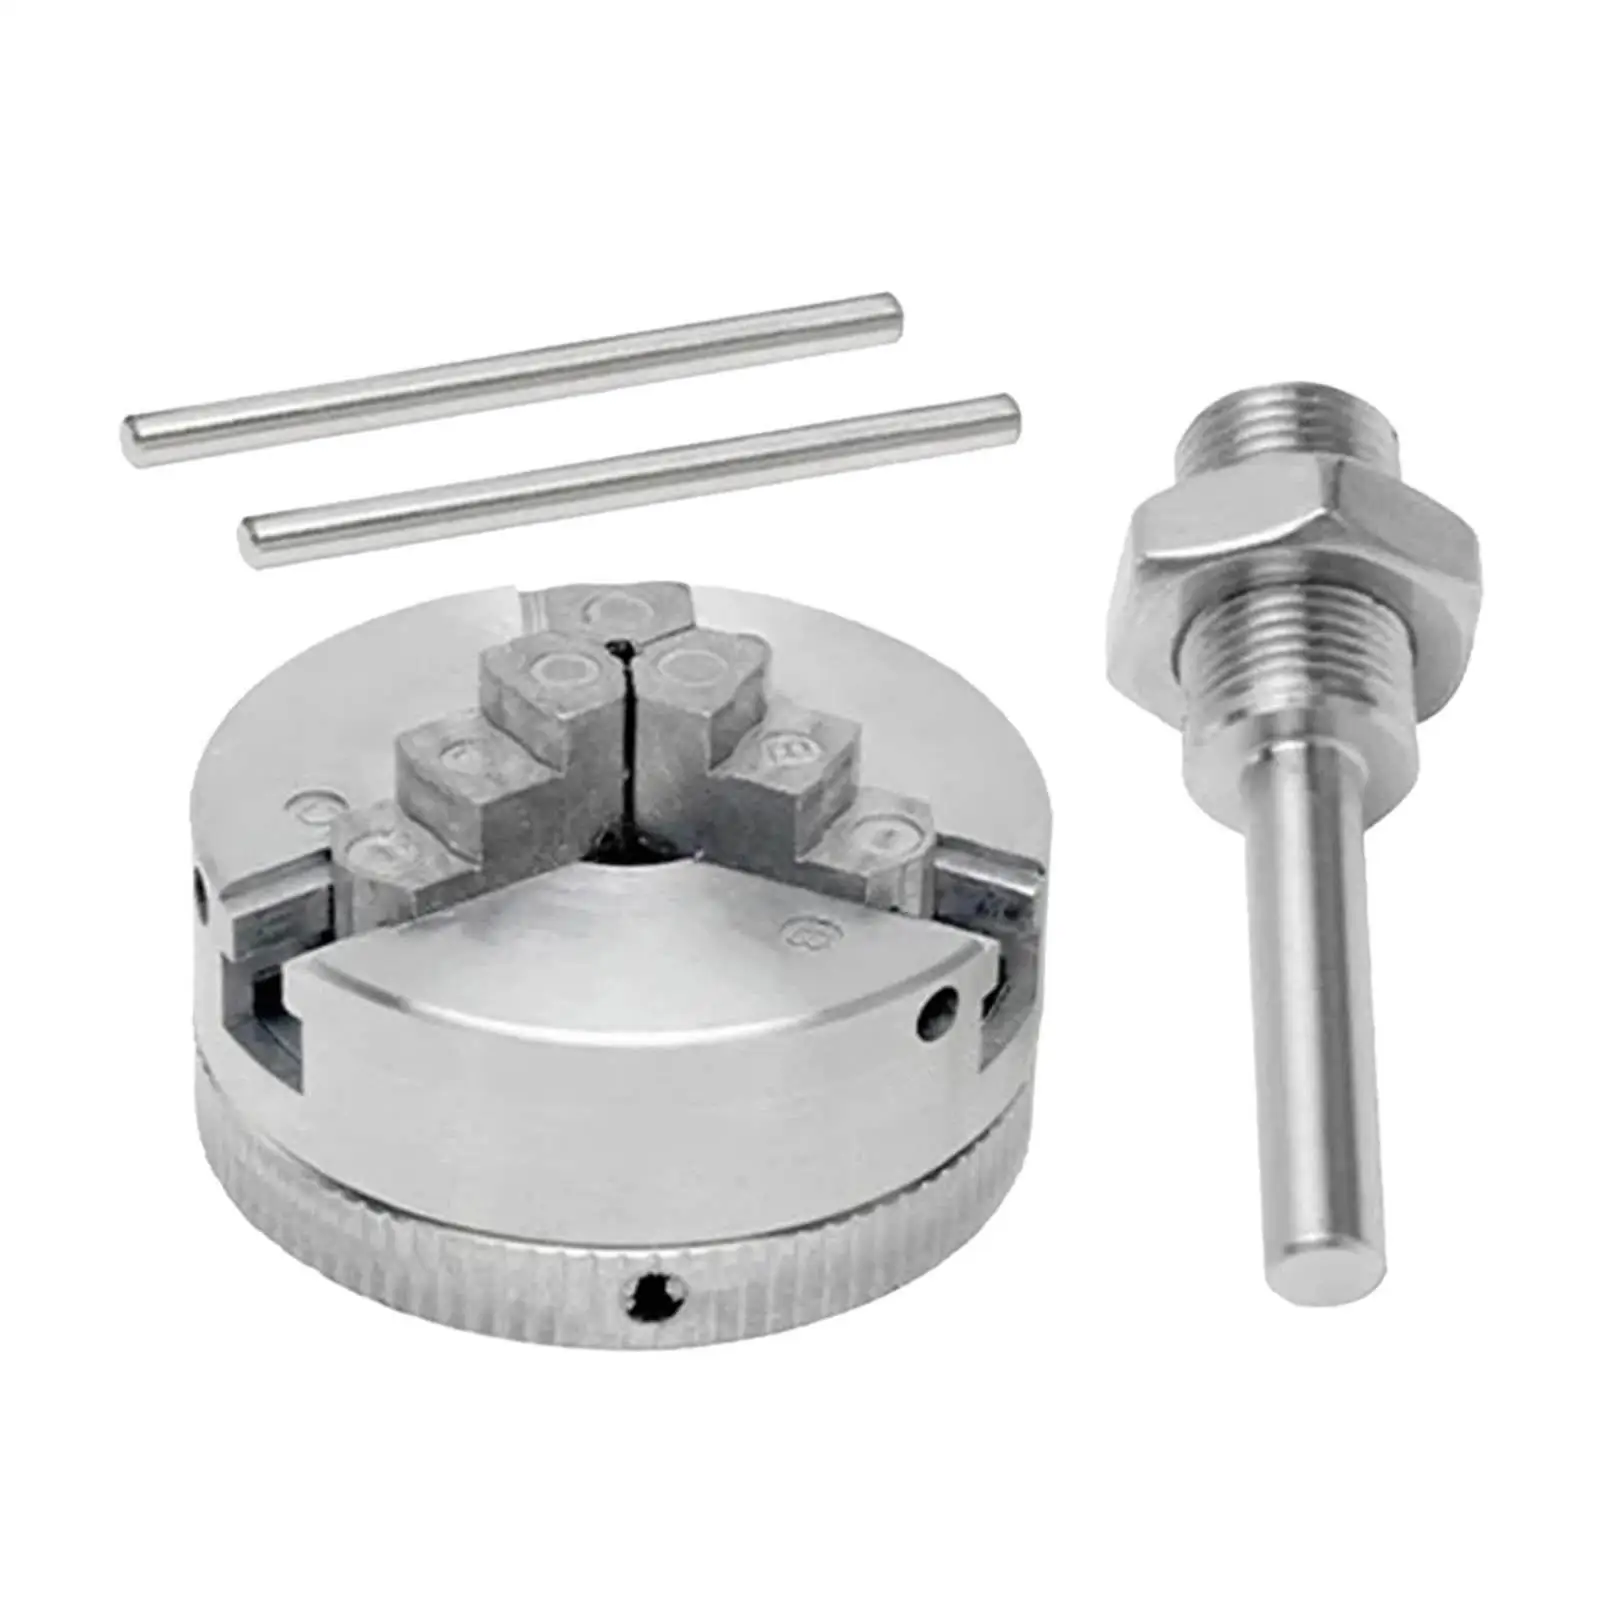 3 Jaws Chuck Portable Electric Drill Chuck Self Centering Lathe Chuck for Grinding Machine Milling Machine Mini Lathe Parts